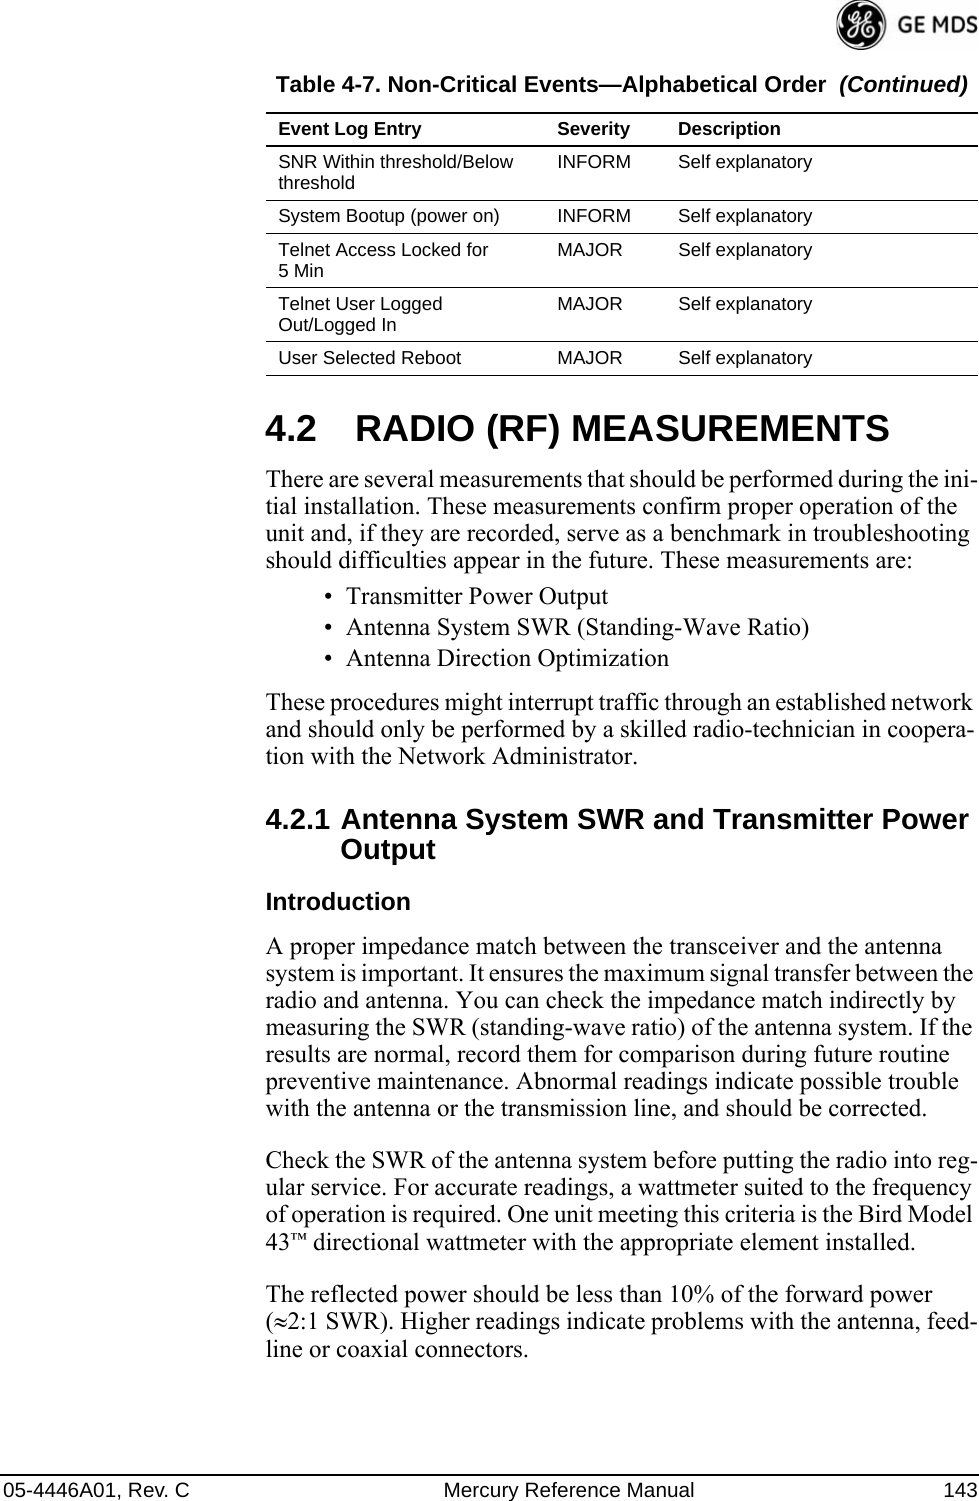 05-4446A01, Rev. C Mercury Reference Manual 1434.2 RADIO (RF) MEASUREMENTSThere are several measurements that should be performed during the ini-tial installation. These measurements confirm proper operation of the unit and, if they are recorded, serve as a benchmark in troubleshooting should difficulties appear in the future. These measurements are:• Transmitter Power Output• Antenna System SWR (Standing-Wave Ratio)• Antenna Direction OptimizationThese procedures might interrupt traffic through an established network and should only be performed by a skilled radio-technician in coopera-tion with the Network Administrator.4.2.1 Antenna System SWR and Transmitter Power OutputIntroductionA proper impedance match between the transceiver and the antenna system is important. It ensures the maximum signal transfer between the radio and antenna. You can check the impedance match indirectly by measuring the SWR (standing-wave ratio) of the antenna system. If the results are normal, record them for comparison during future routine preventive maintenance. Abnormal readings indicate possible trouble with the antenna or the transmission line, and should be corrected.Check the SWR of the antenna system before putting the radio into reg-ular service. For accurate readings, a wattmeter suited to the frequency of operation is required. One unit meeting this criteria is the Bird Model 43™ directional wattmeter with the appropriate element installed.The reflected power should be less than 10% of the forward power (≈2:1 SWR). Higher readings indicate problems with the antenna, feed-line or coaxial connectors.SNR Within threshold/Below threshold INFORM Self explanatorySystem Bootup (power on) INFORM Self explanatoryTelnet Access Locked for 5Min MAJOR Self explanatoryTelnet User Logged Out/Logged In MAJOR Self explanatoryUser Selected Reboot MAJOR Self explanatoryTable 4-7. Non-Critical Events—Alphabetical Order  (Continued)Event Log Entry Severity Description